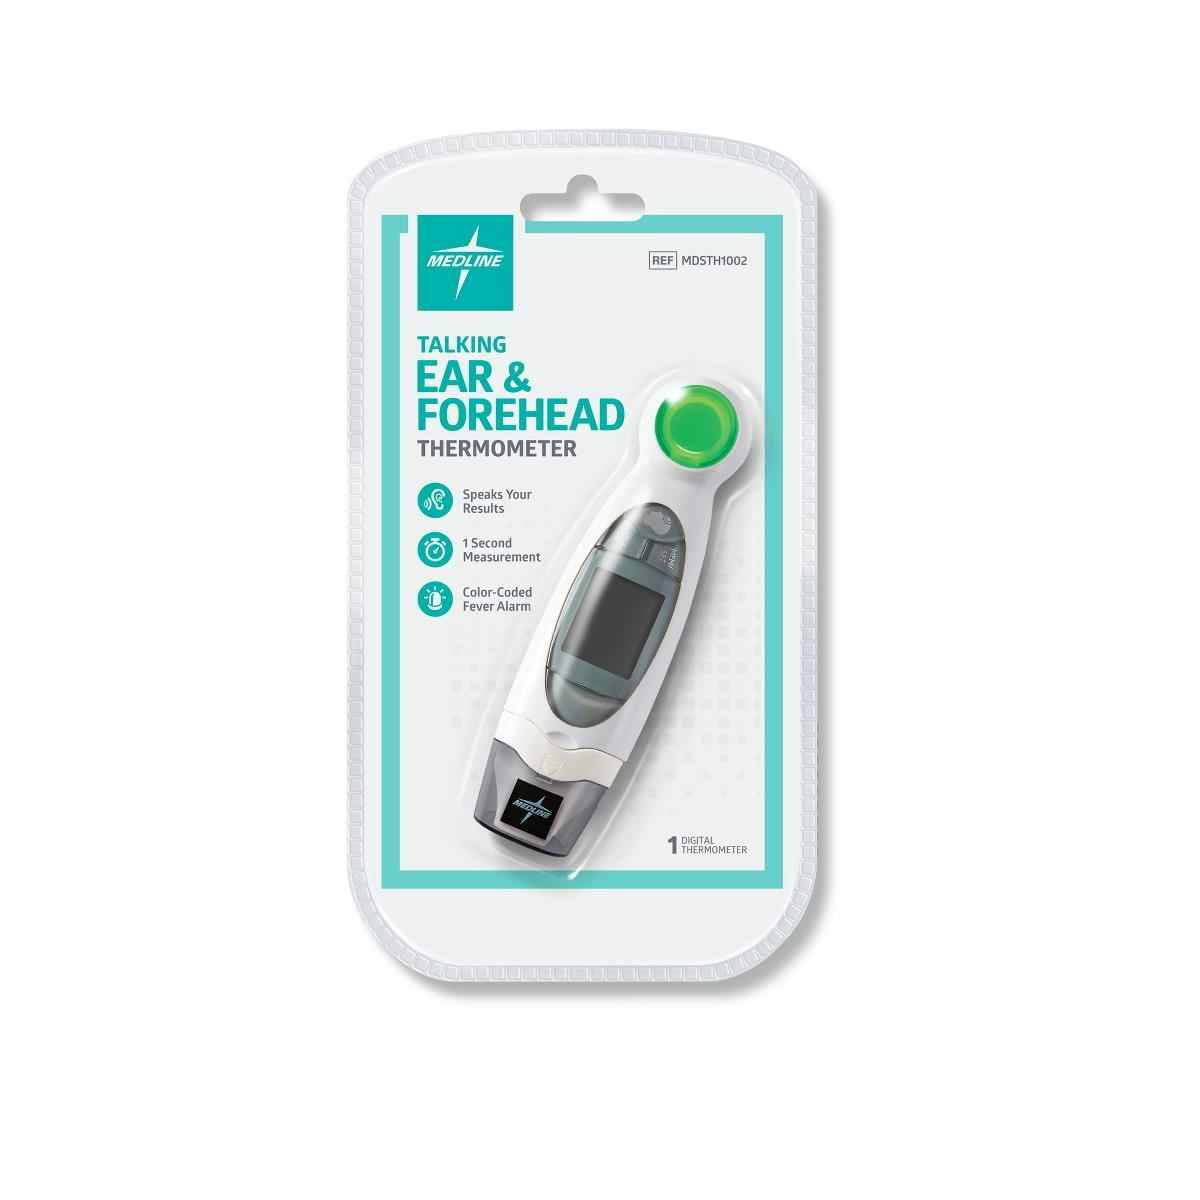 Medline Talking Ear and Forehead Home Thermometer, MDSTH1002, 1 Each